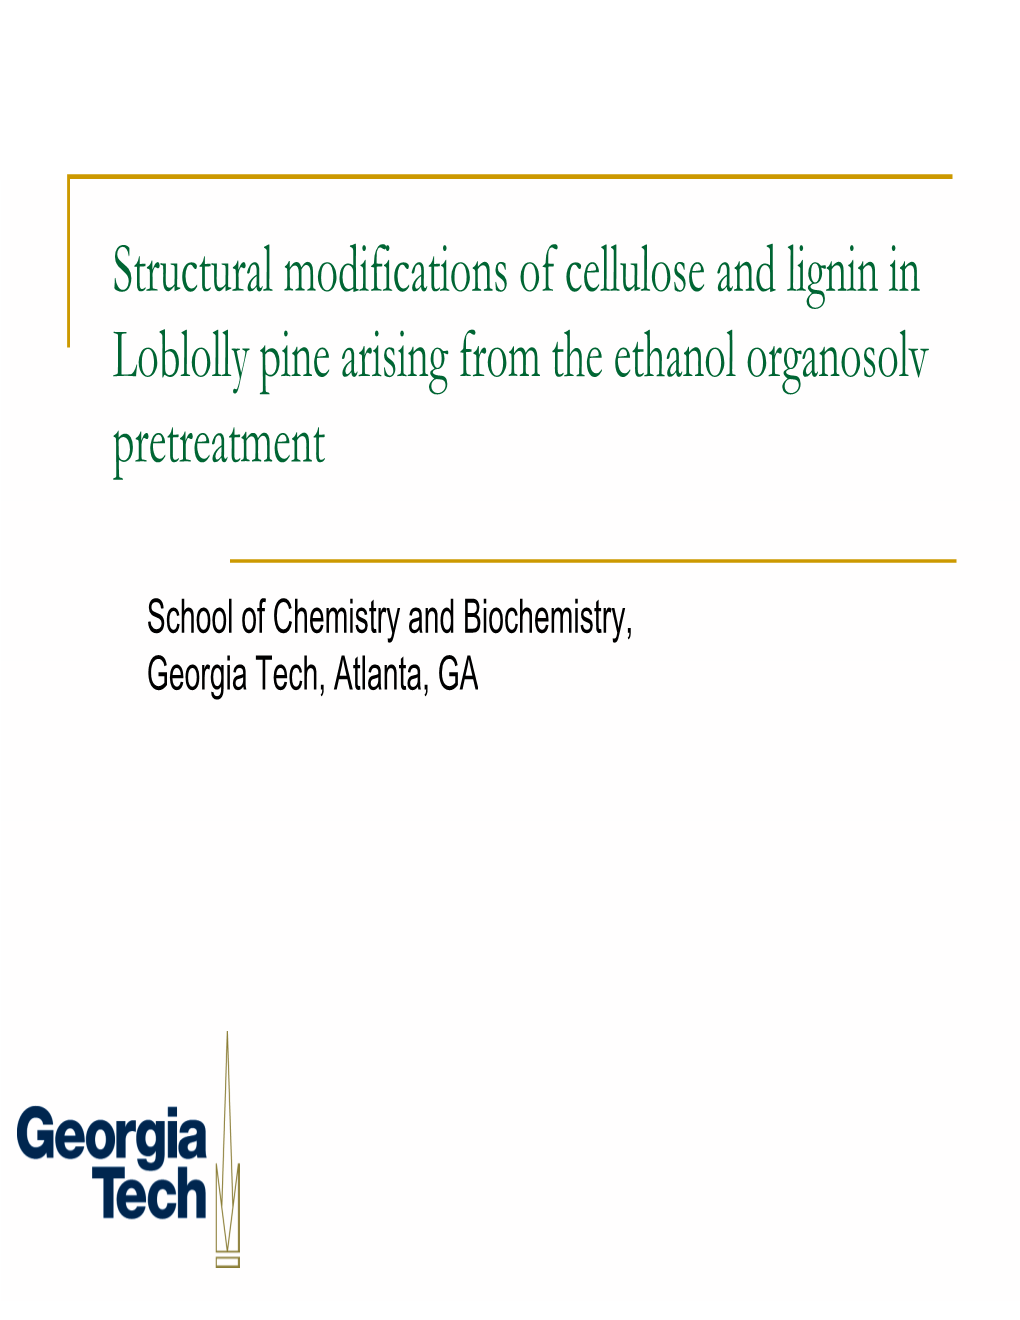 Structural Modifications of Cellulose and Lignin in Loblolly Pine Arising from the Ethanol Organosolv Pretreatment